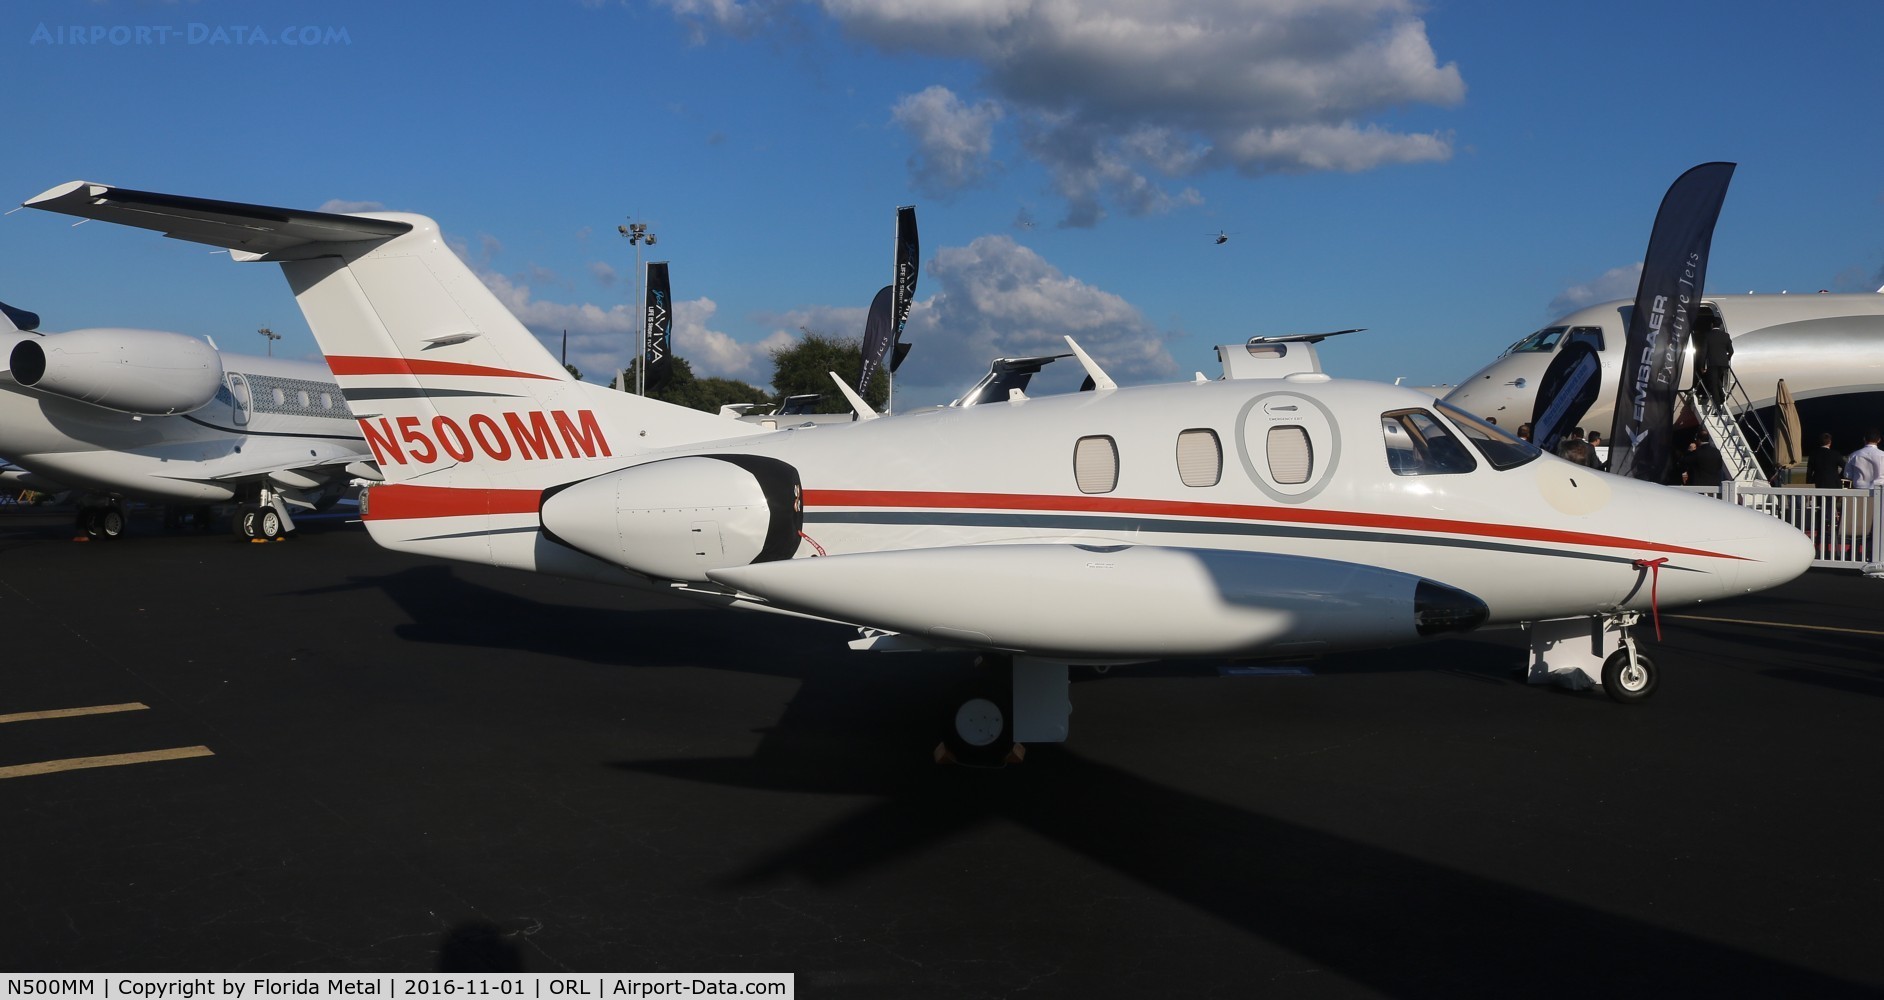 N500MM, 2008 Eclipse Aviation Corp EA500 C/N 000139, Eclipse 500